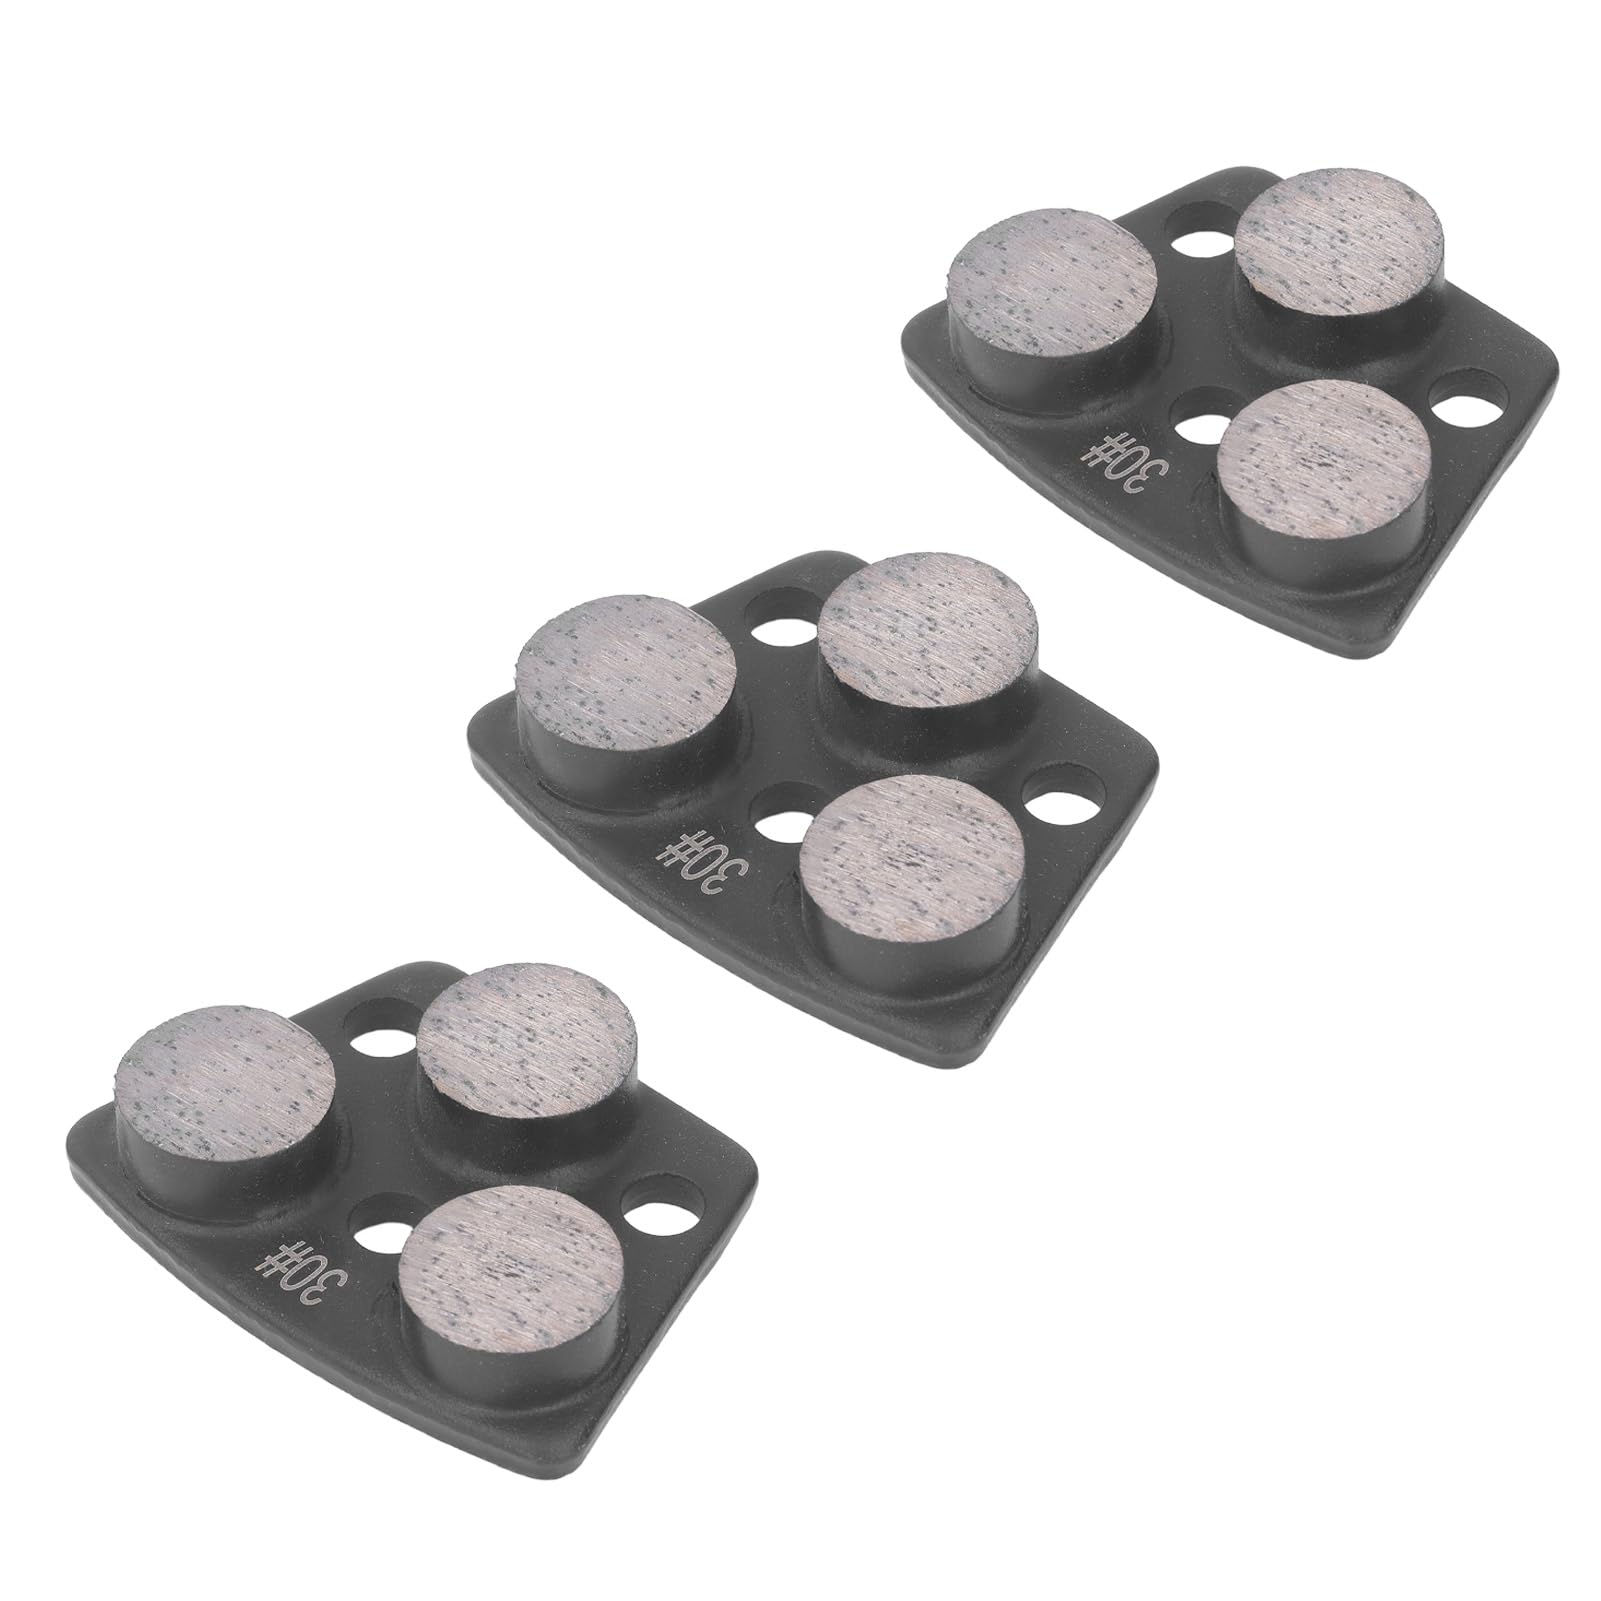 3Pcs Diamond Grinding Shoes Trapezoid Concrete Floor Cutting 3 Cylinder Teeth Grinder Coating Disc Shoe Black Grit 30 Metal and Resin Abrasive Construction Tool